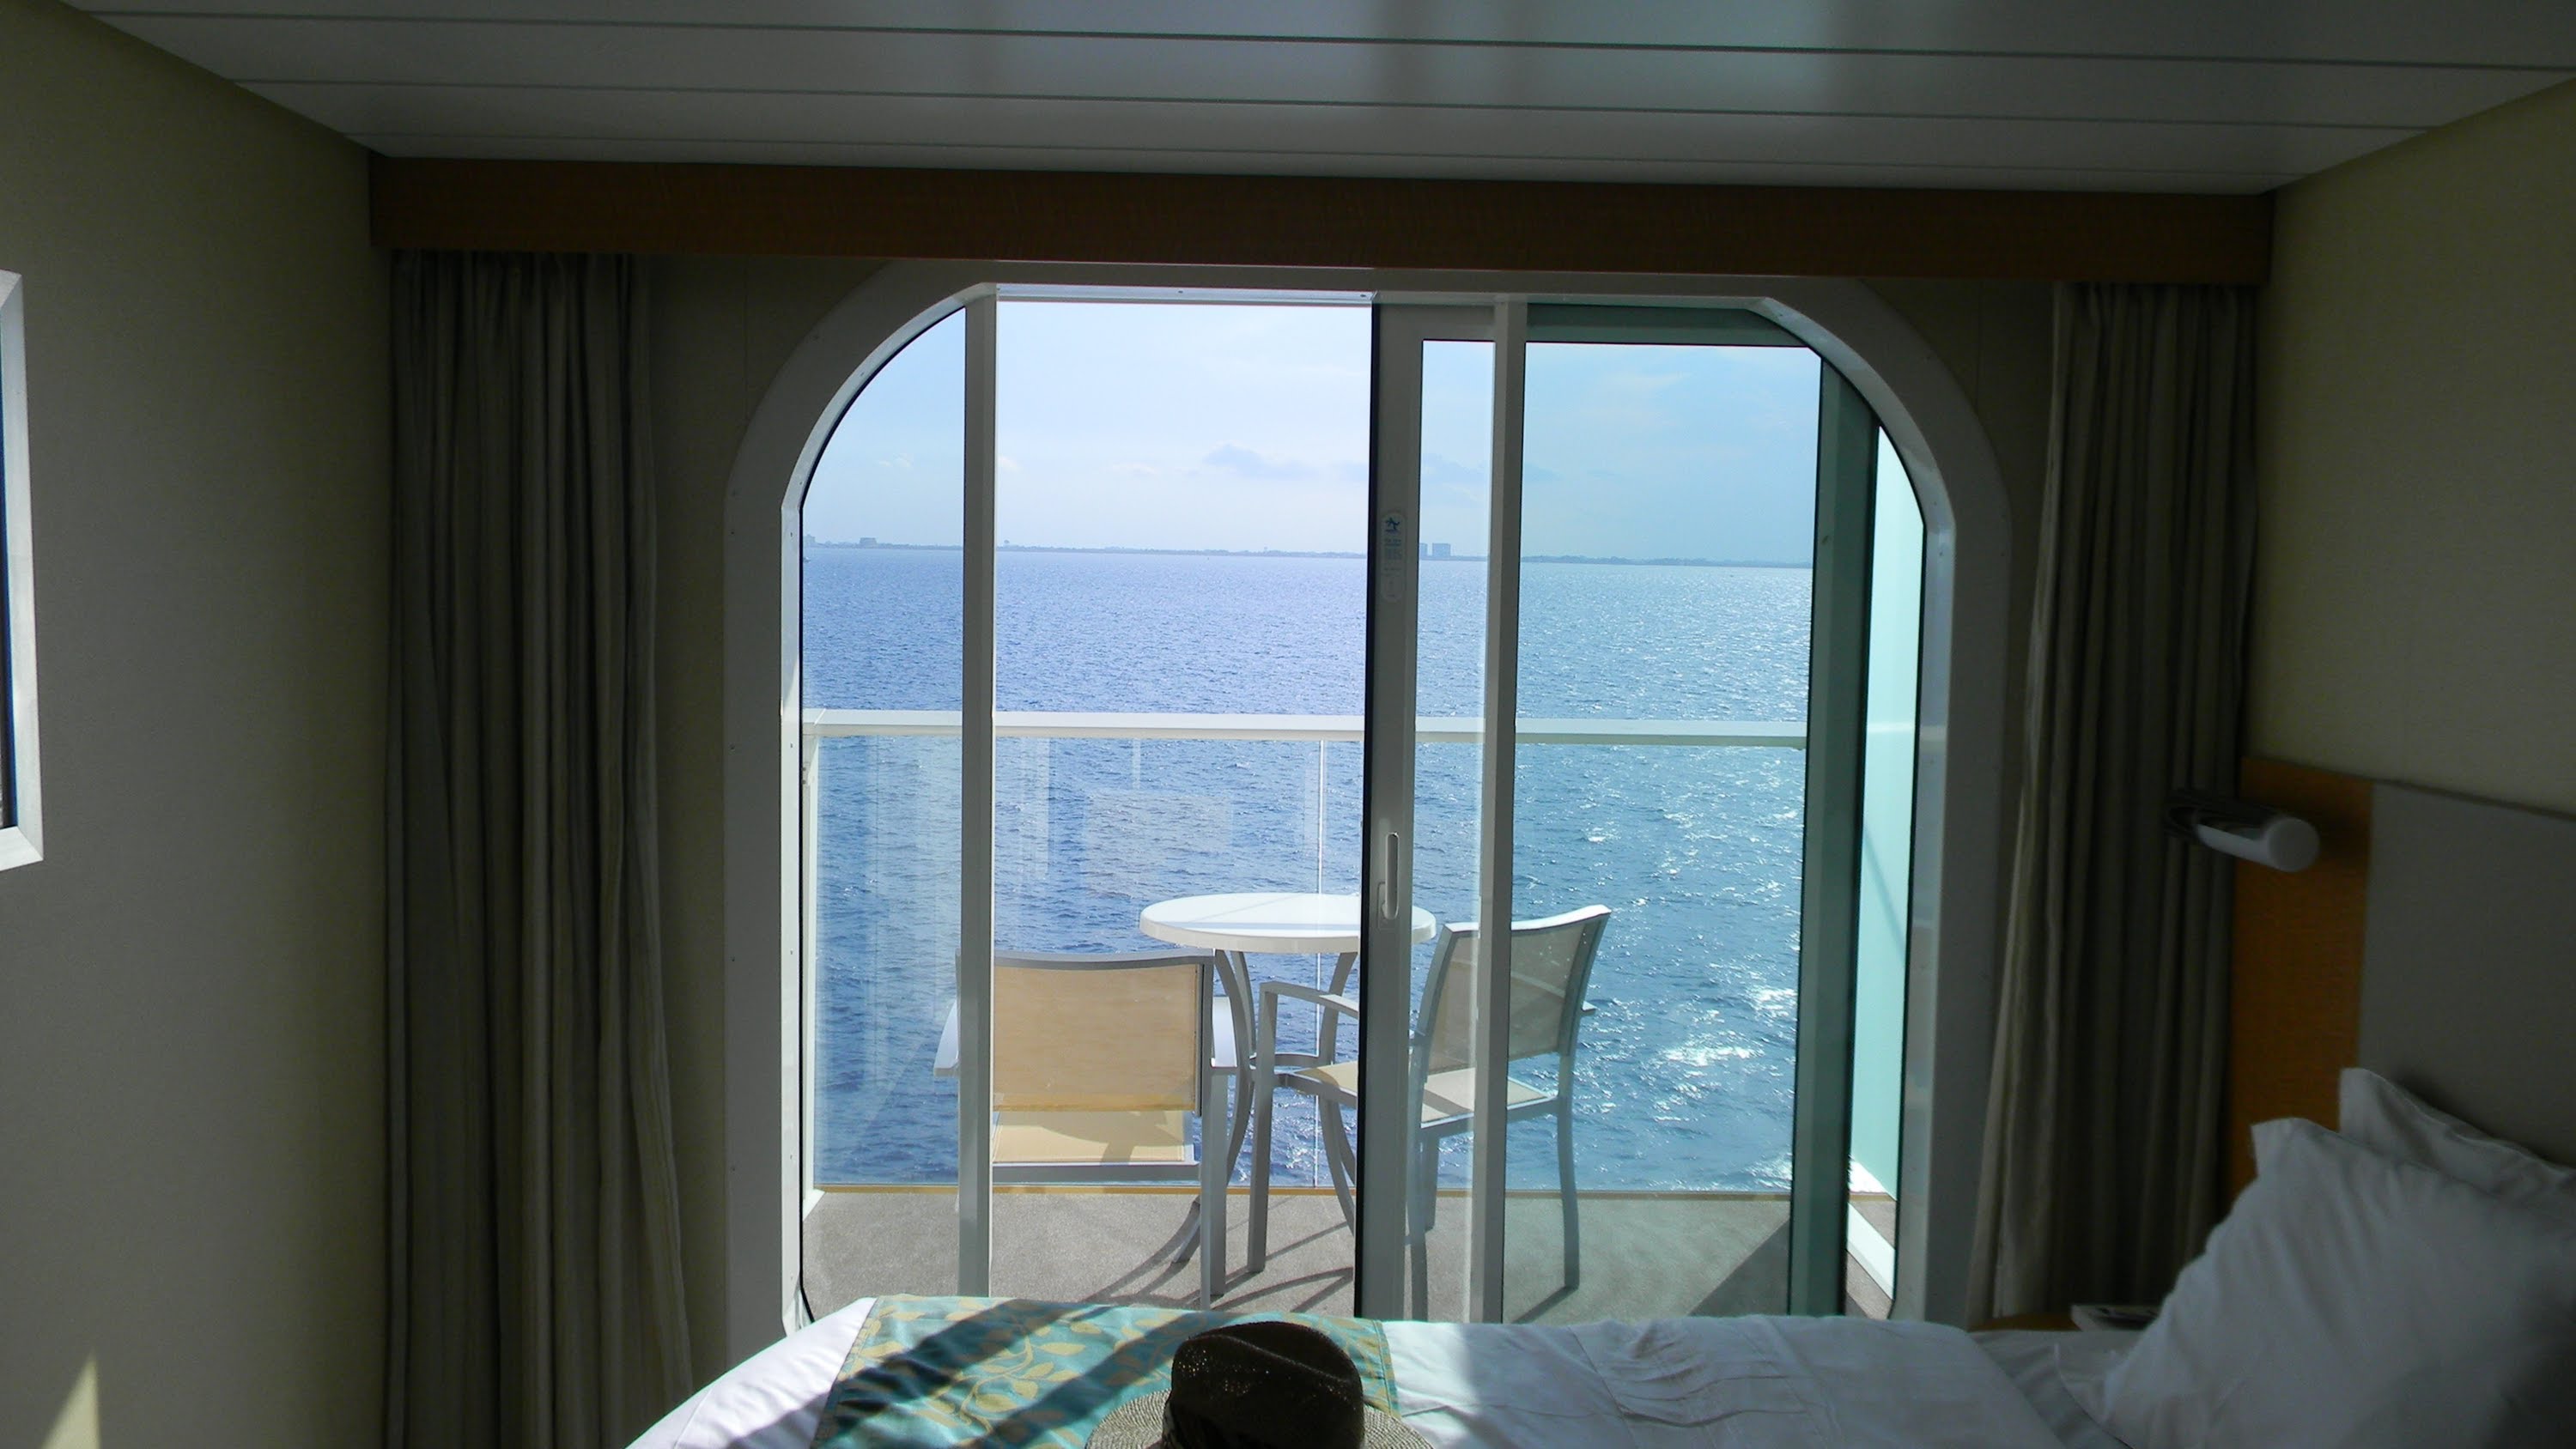 Allure Of The Seas Oceanview Balcony Stateroom Tour. Cabin #6682 ...